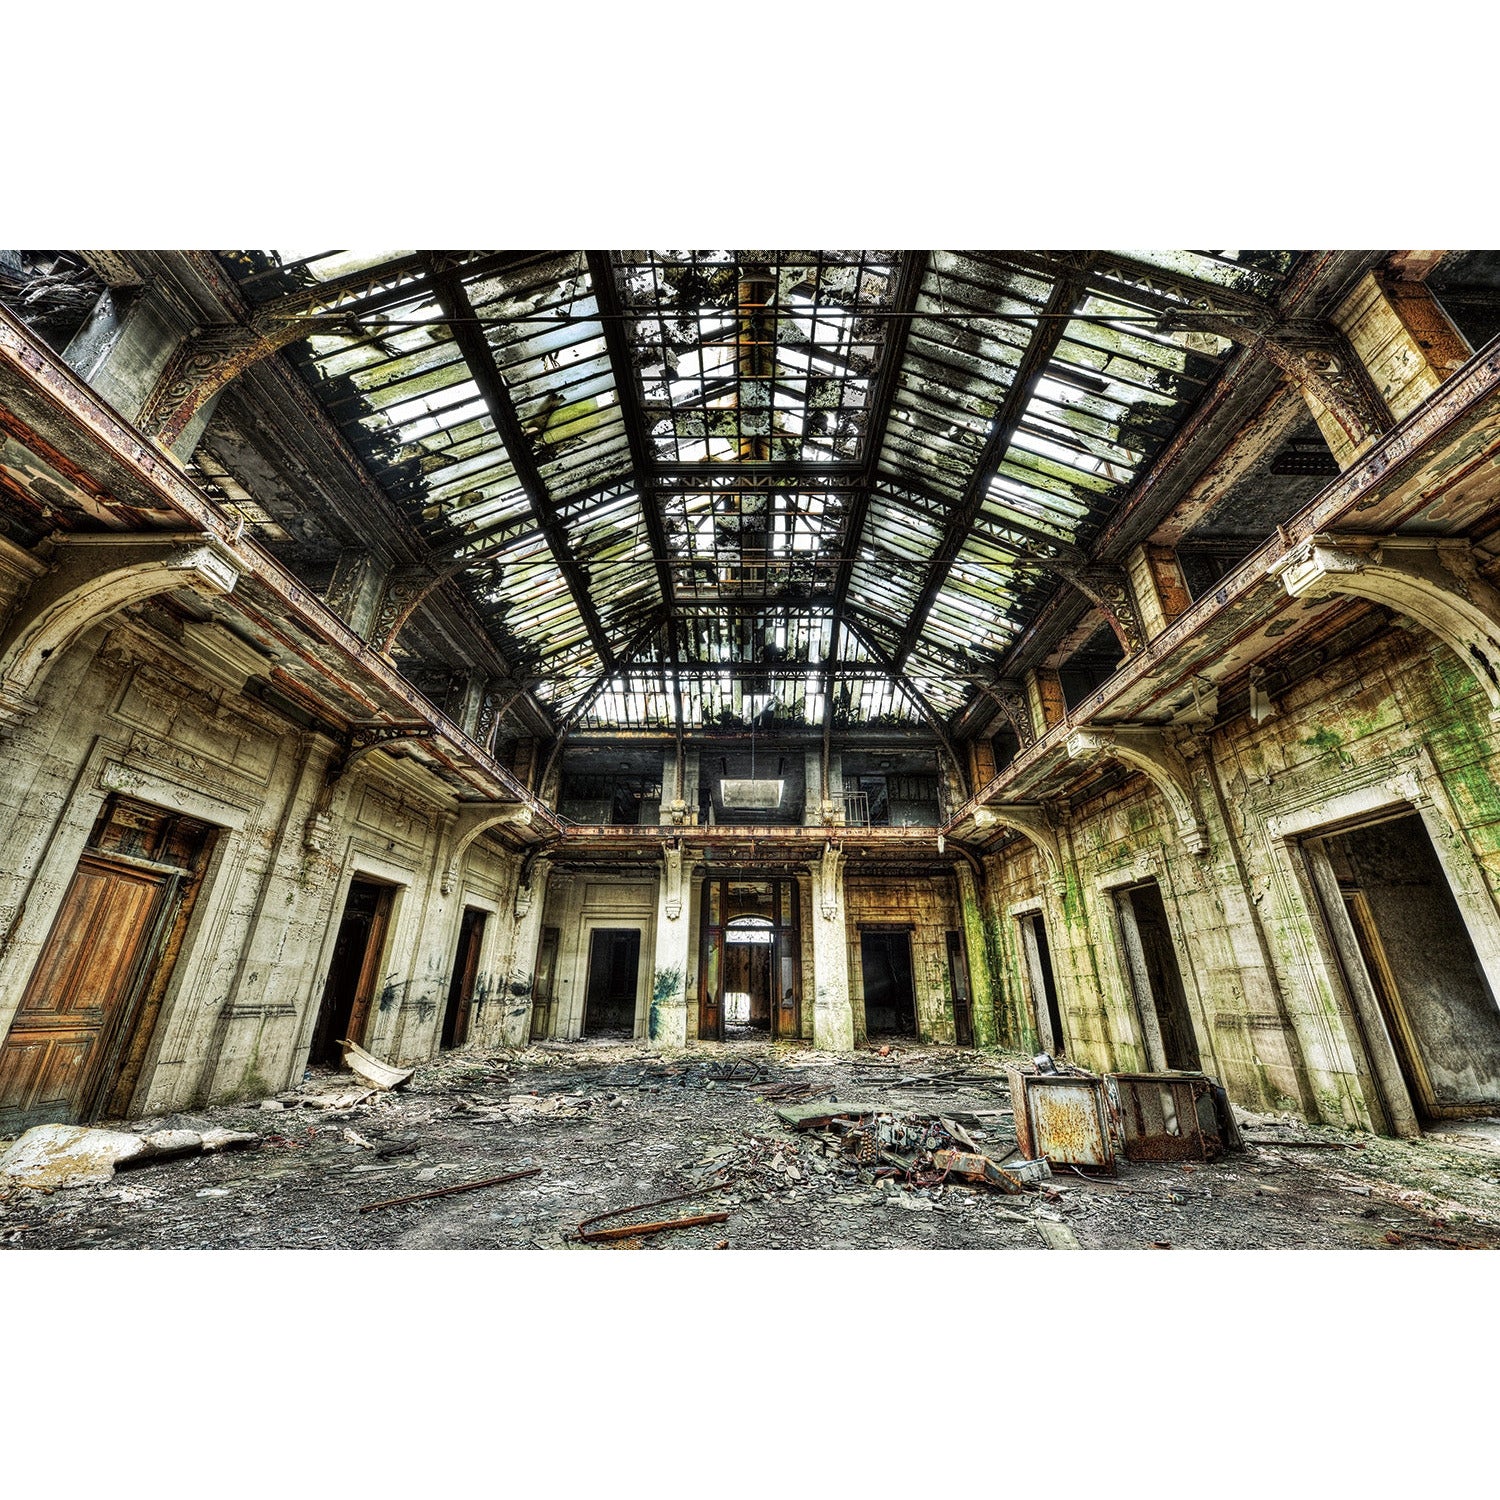 Glass painting room with glass ceiling - Abandoned places